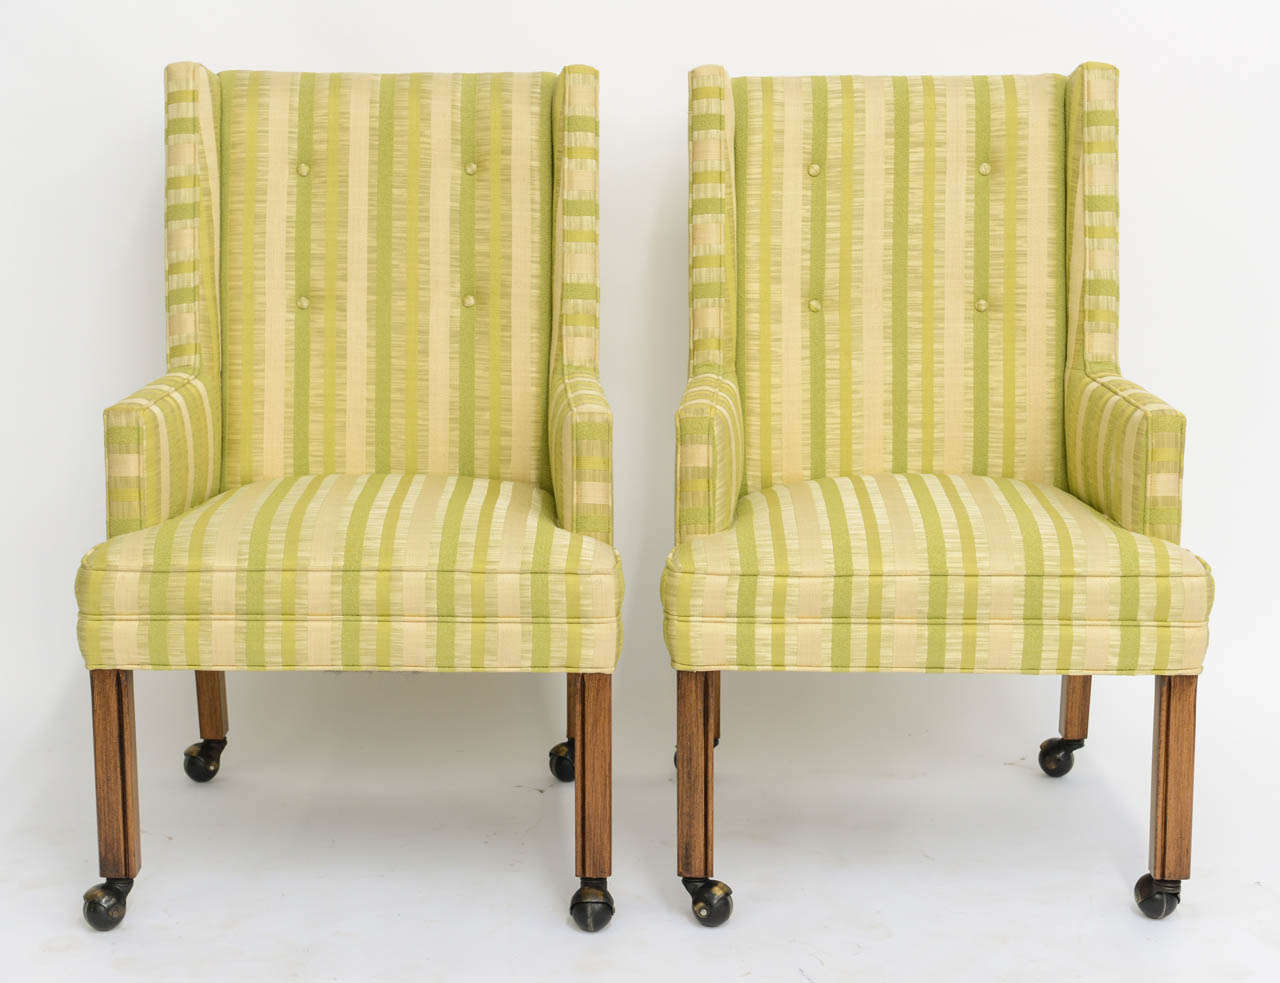 REDUCED FROM $1,950....Very tailored and regal, with button tuft back and on casters, this pair of high back armchairs in the style of Edward Wormley for Dunbar are quite smart. Very good original 1960s fabric with a couple of light small stains,